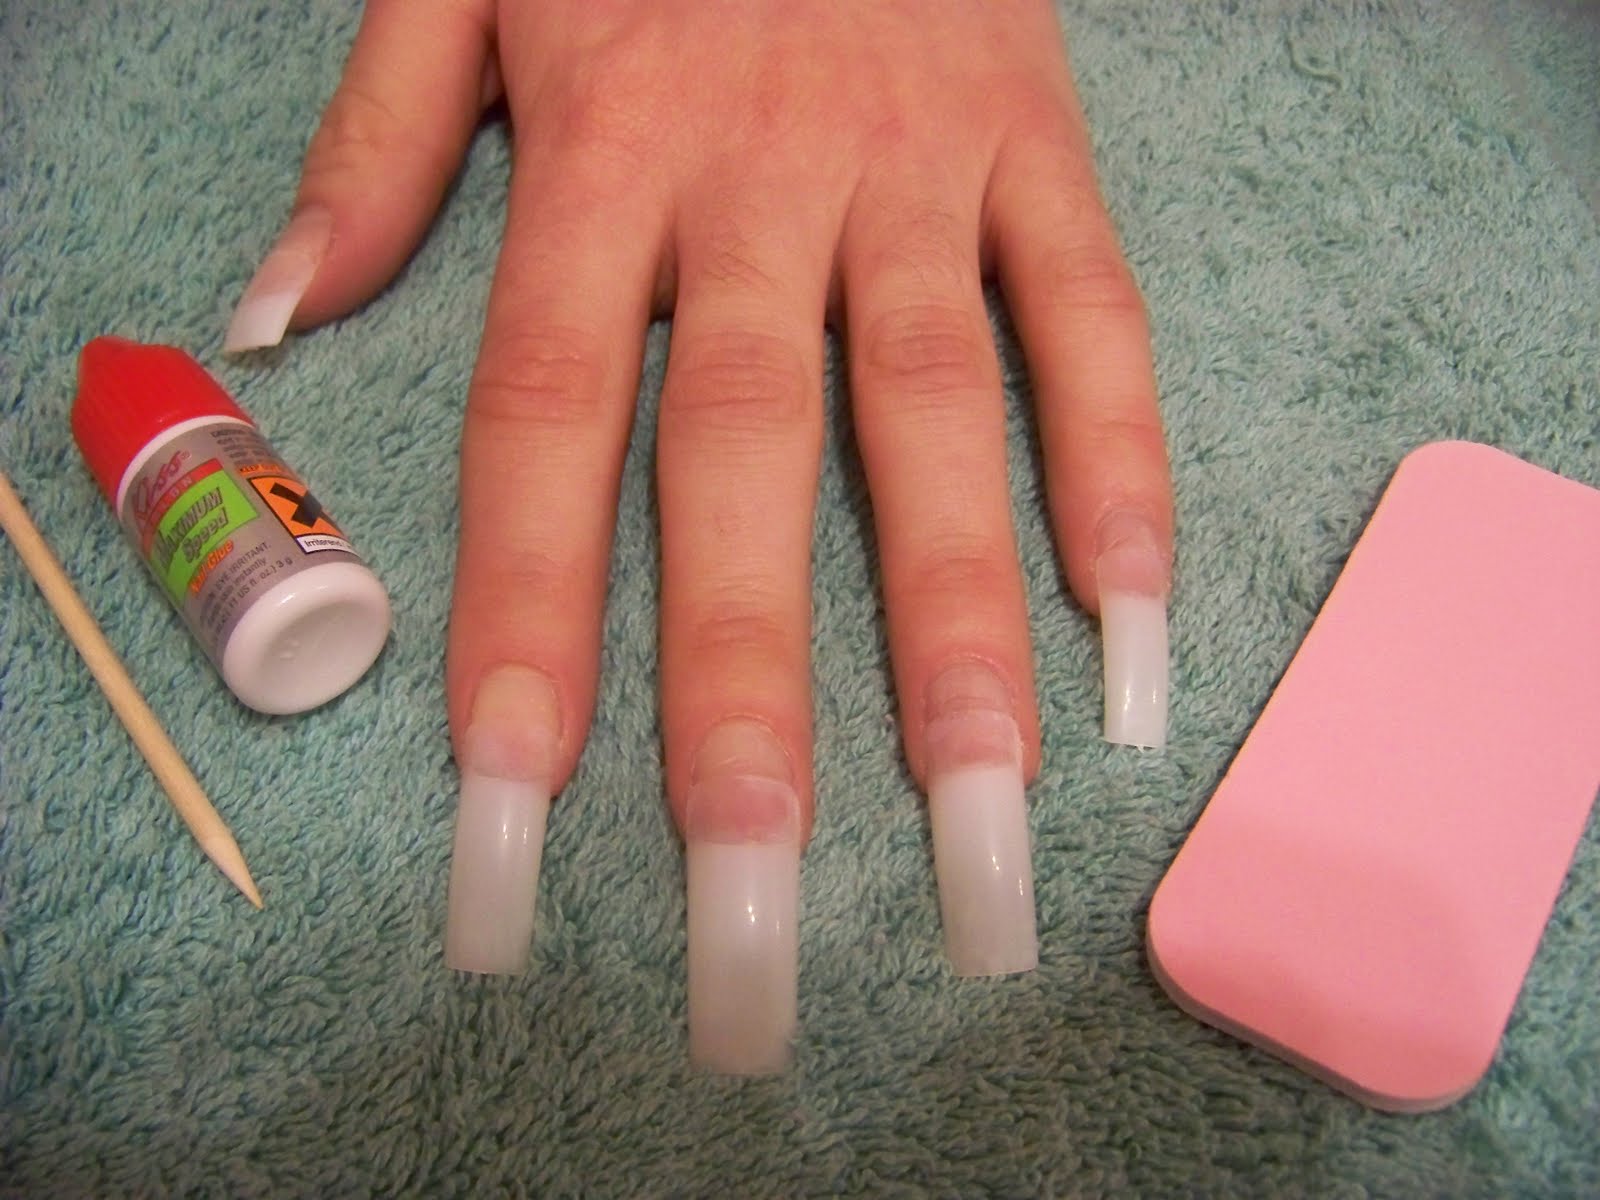 to trim the nails down to the length you want them to be. Using a nail ...